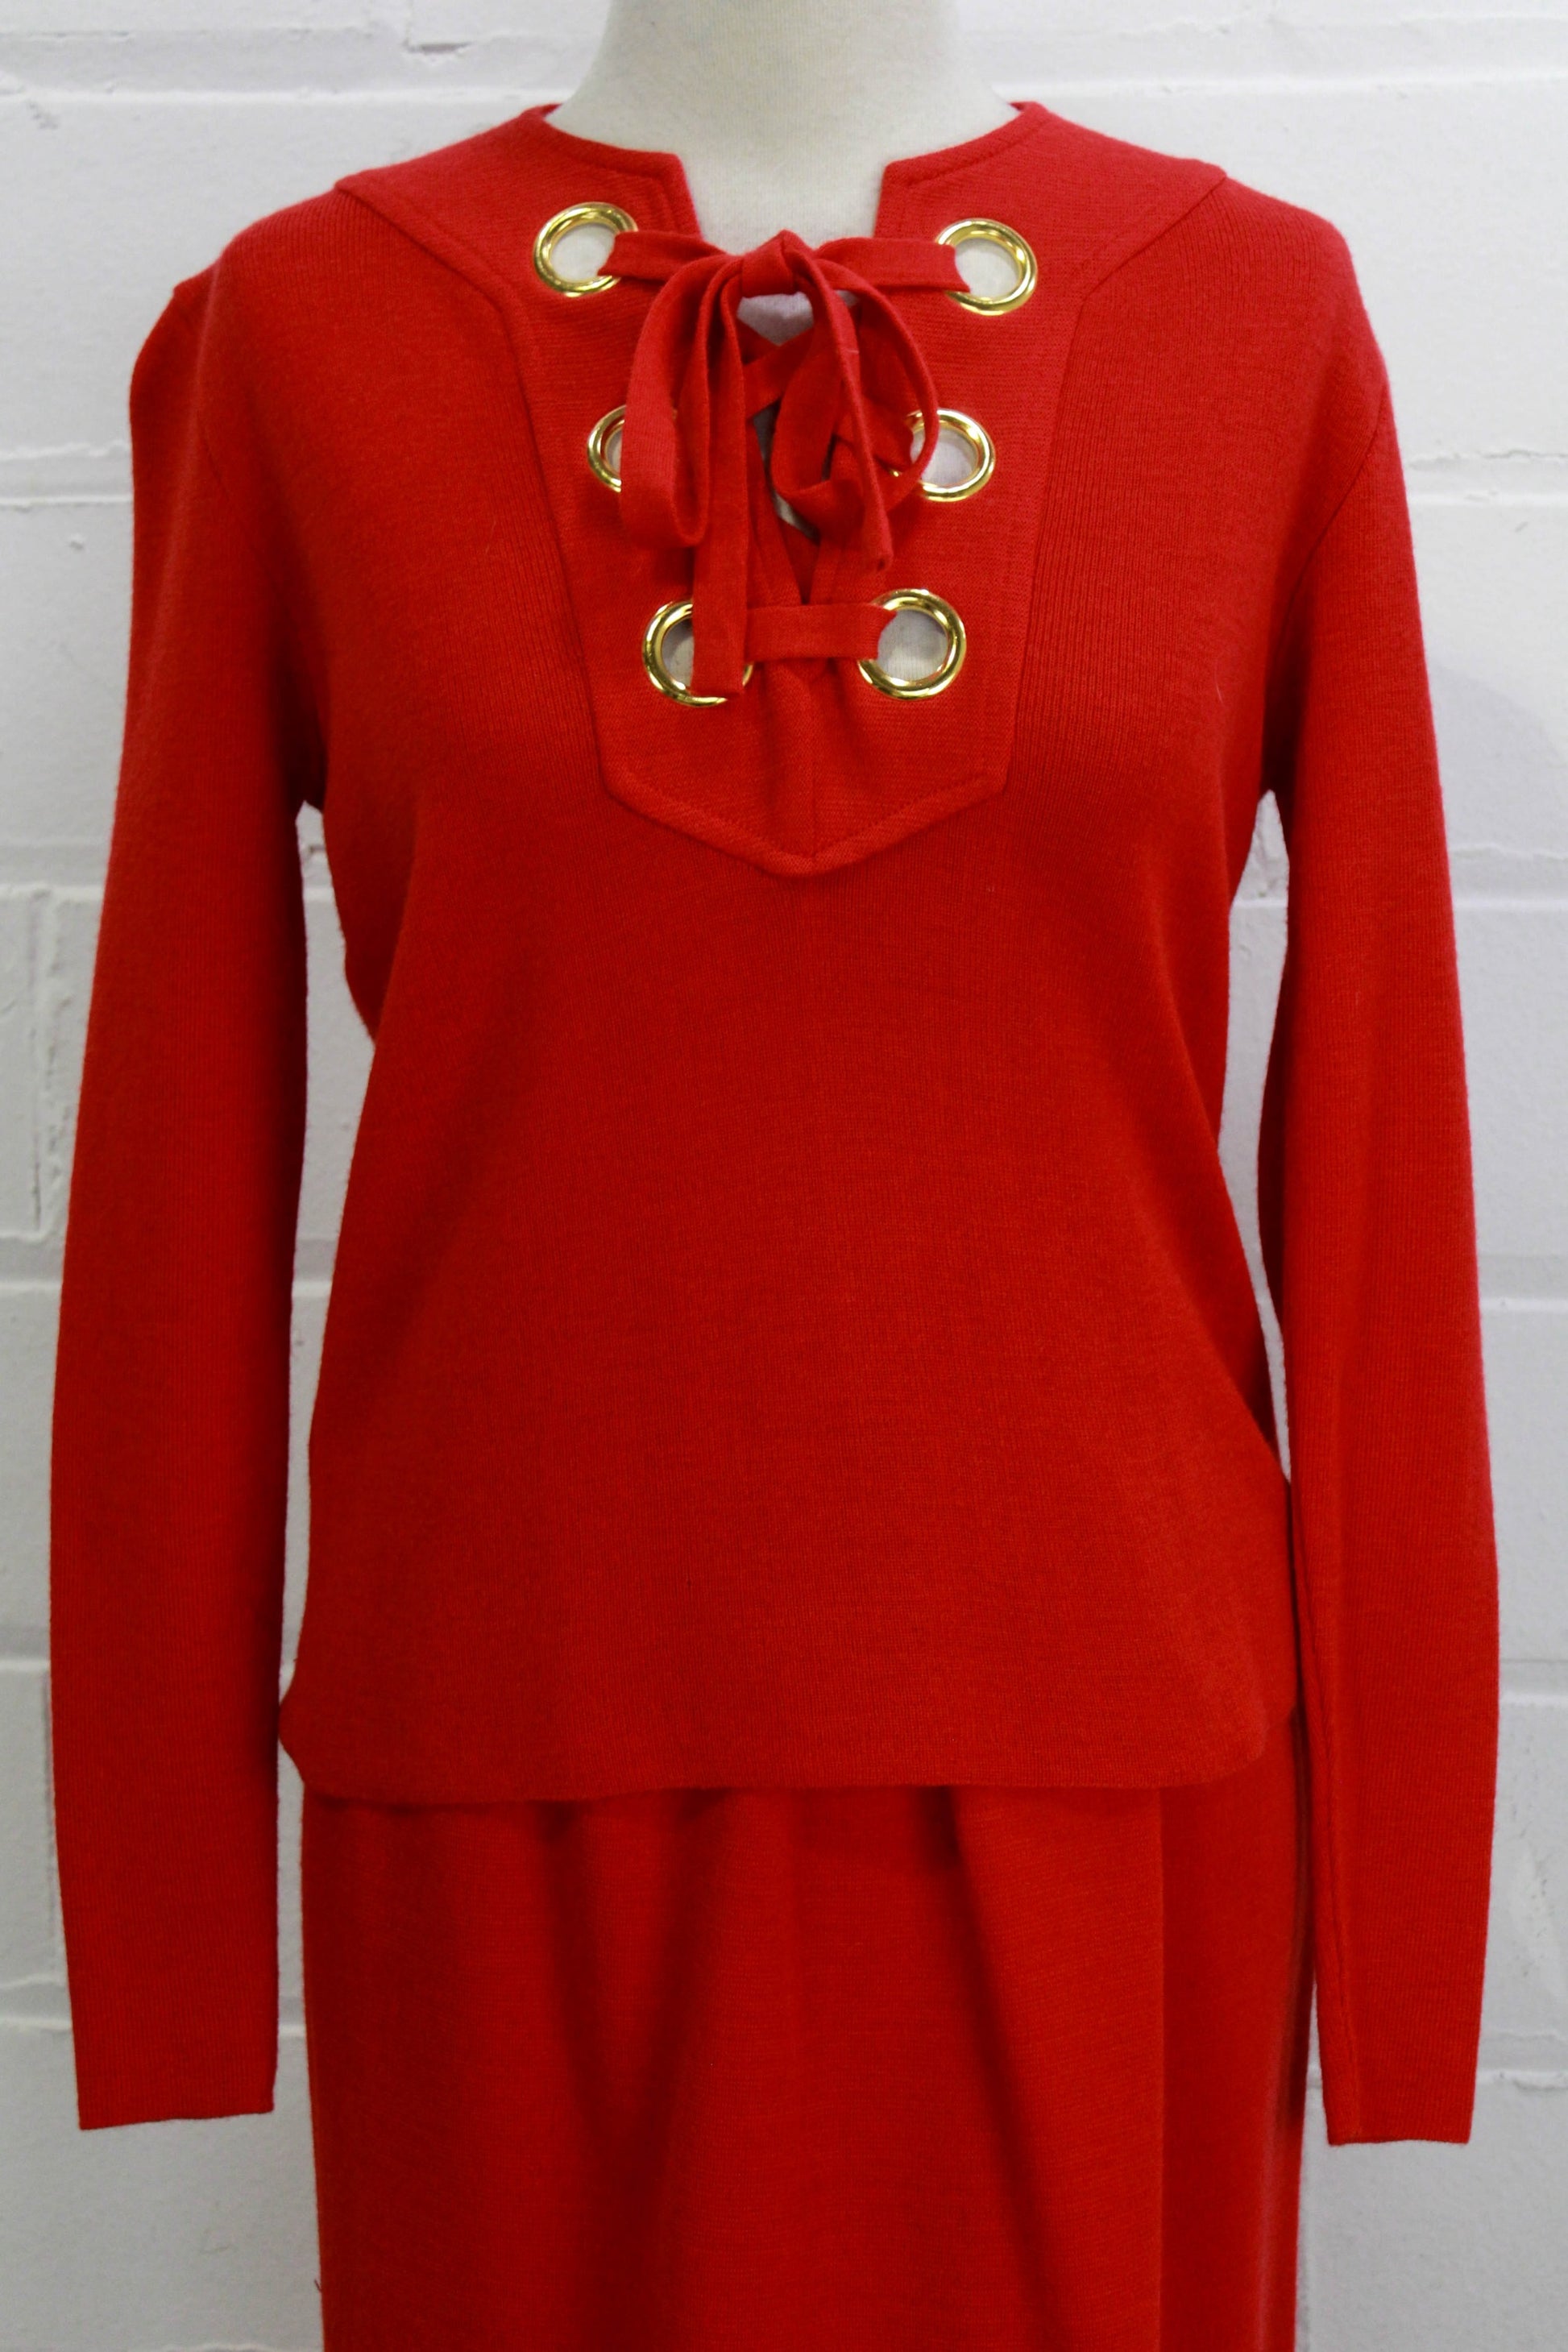 arbe knits italy red wool skirt and top set with gold grommets front view